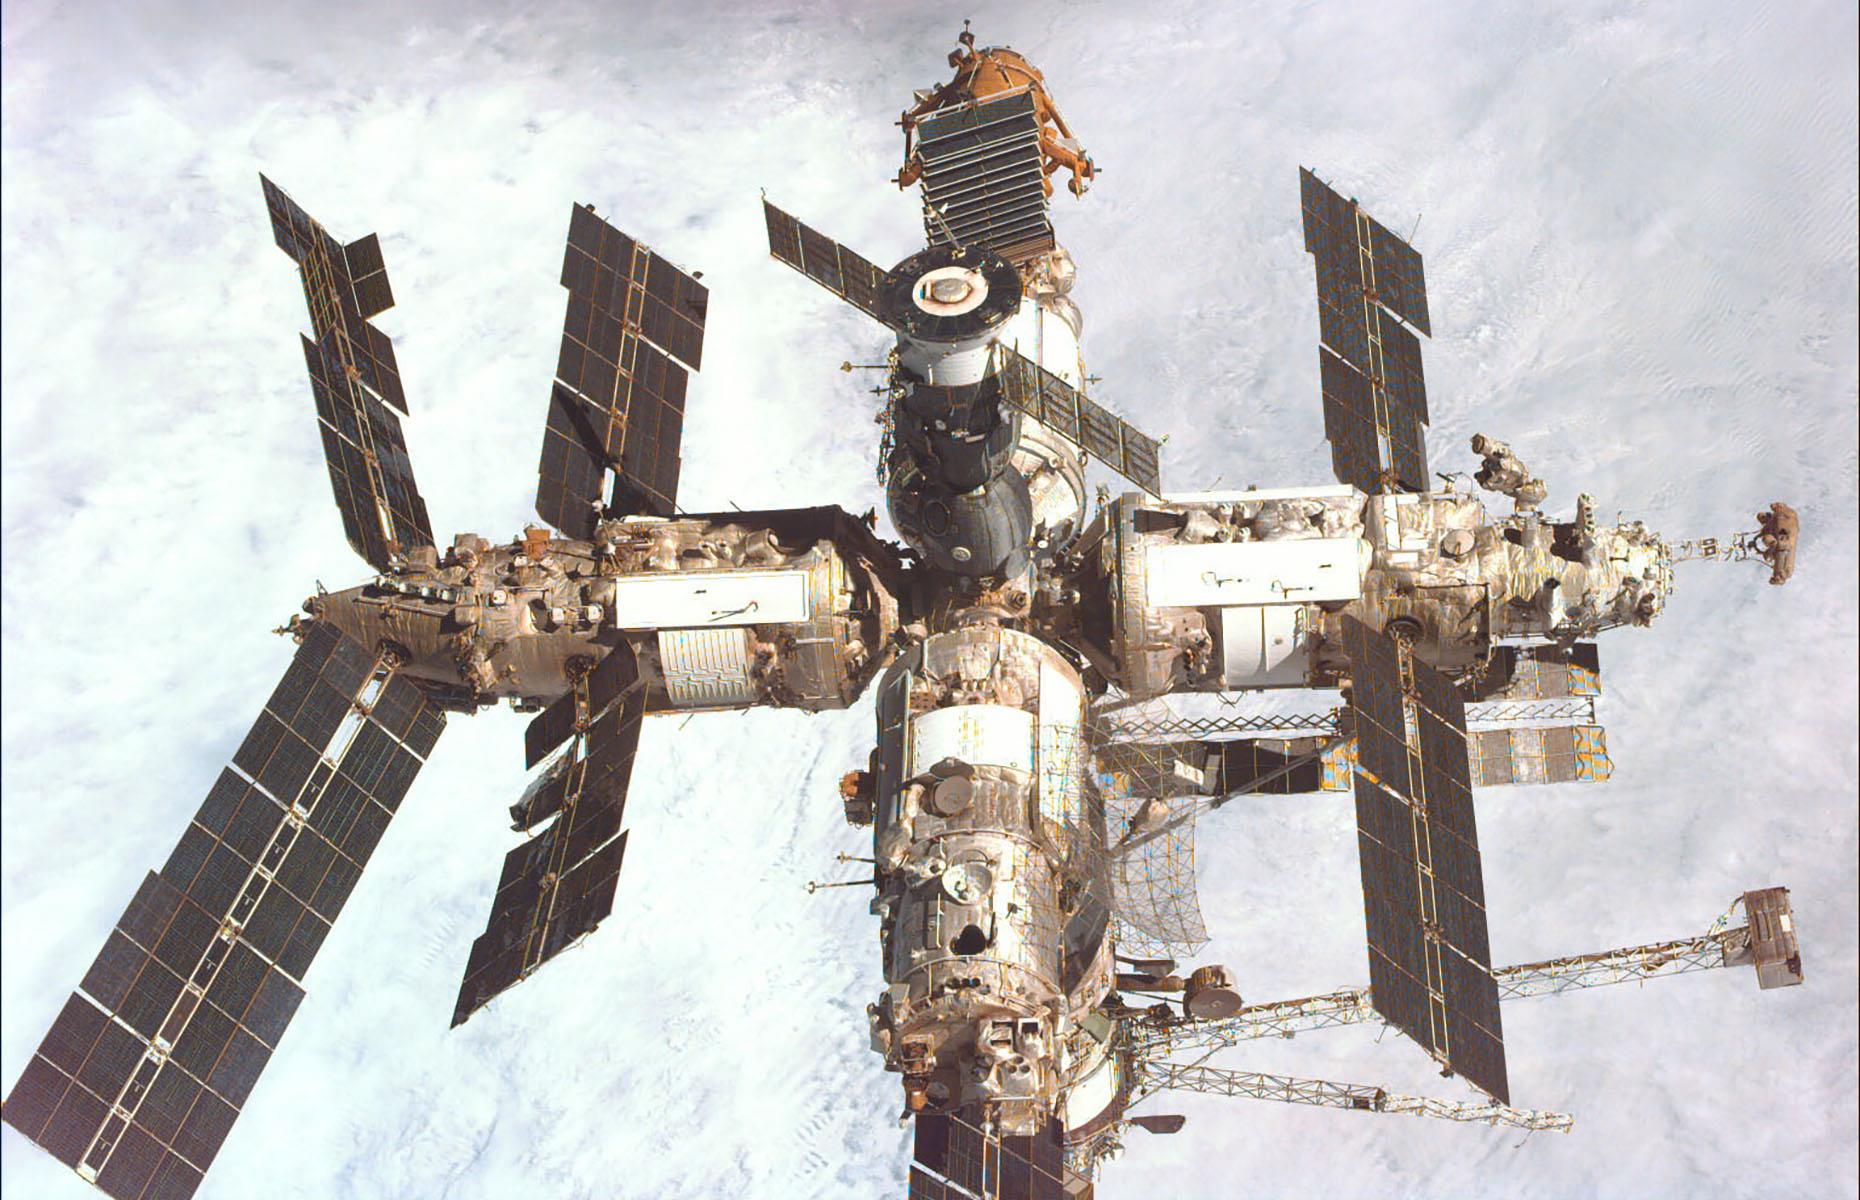 <p>By contrast, Russia was able to control the reentry of the Mir Space Station, which was launched by the USSR in 1986. Mir came down on March 23, 2001 in Point Nemo, an area of the South Pacific known as the "spacecraft cemetery." Point Nemo is the furthest spot away from any land on the planet and is the final resting place of around 300 spent spacecraft. </p>